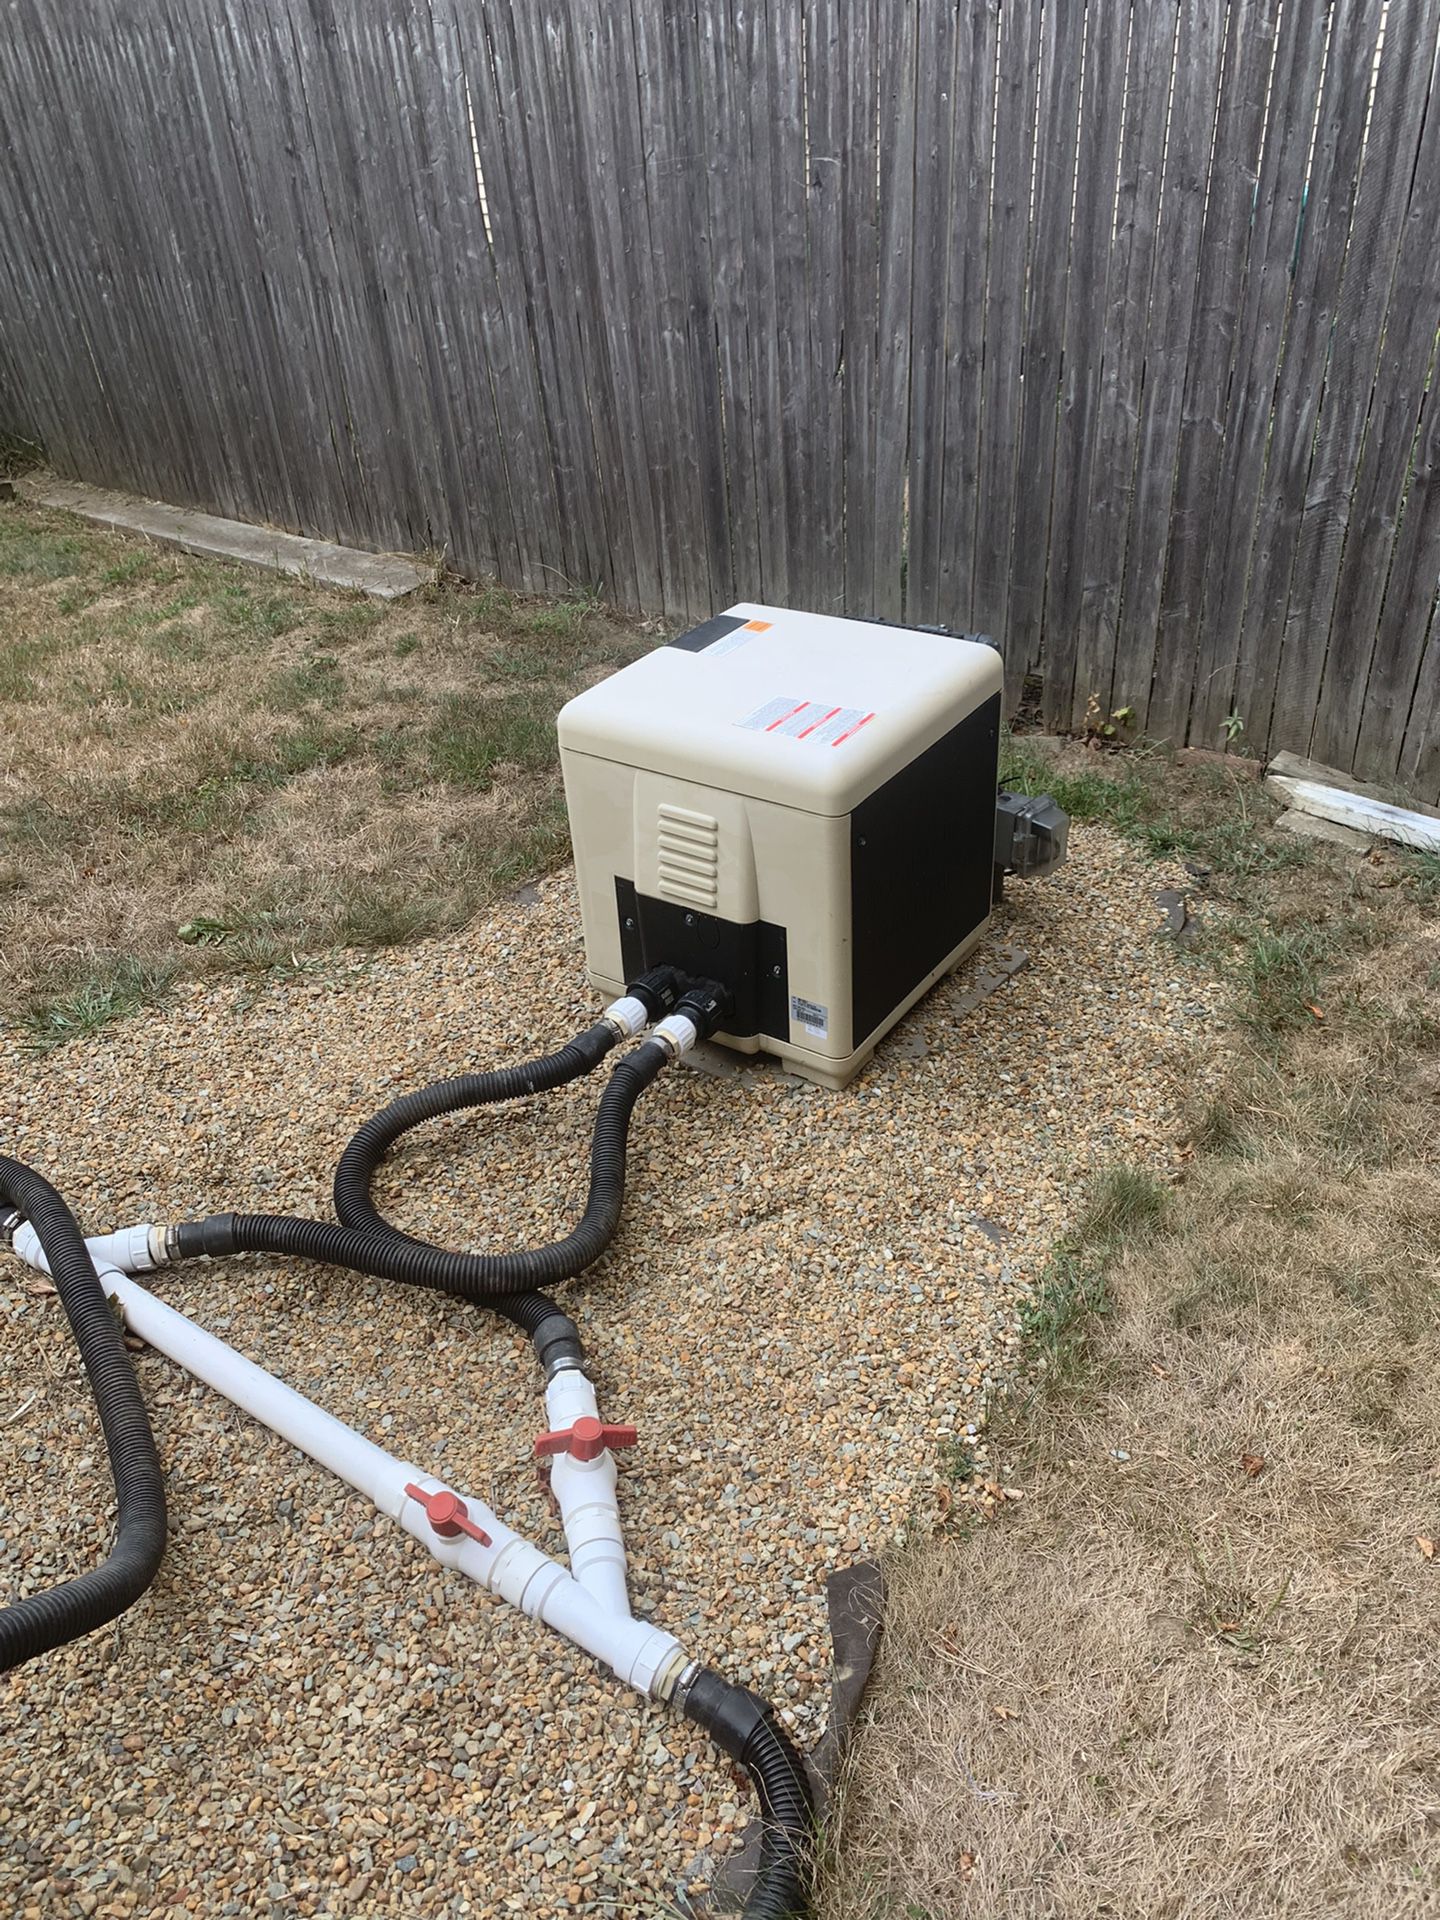 Pentair Above Ground Pool Heater.propane Or Natural Gas